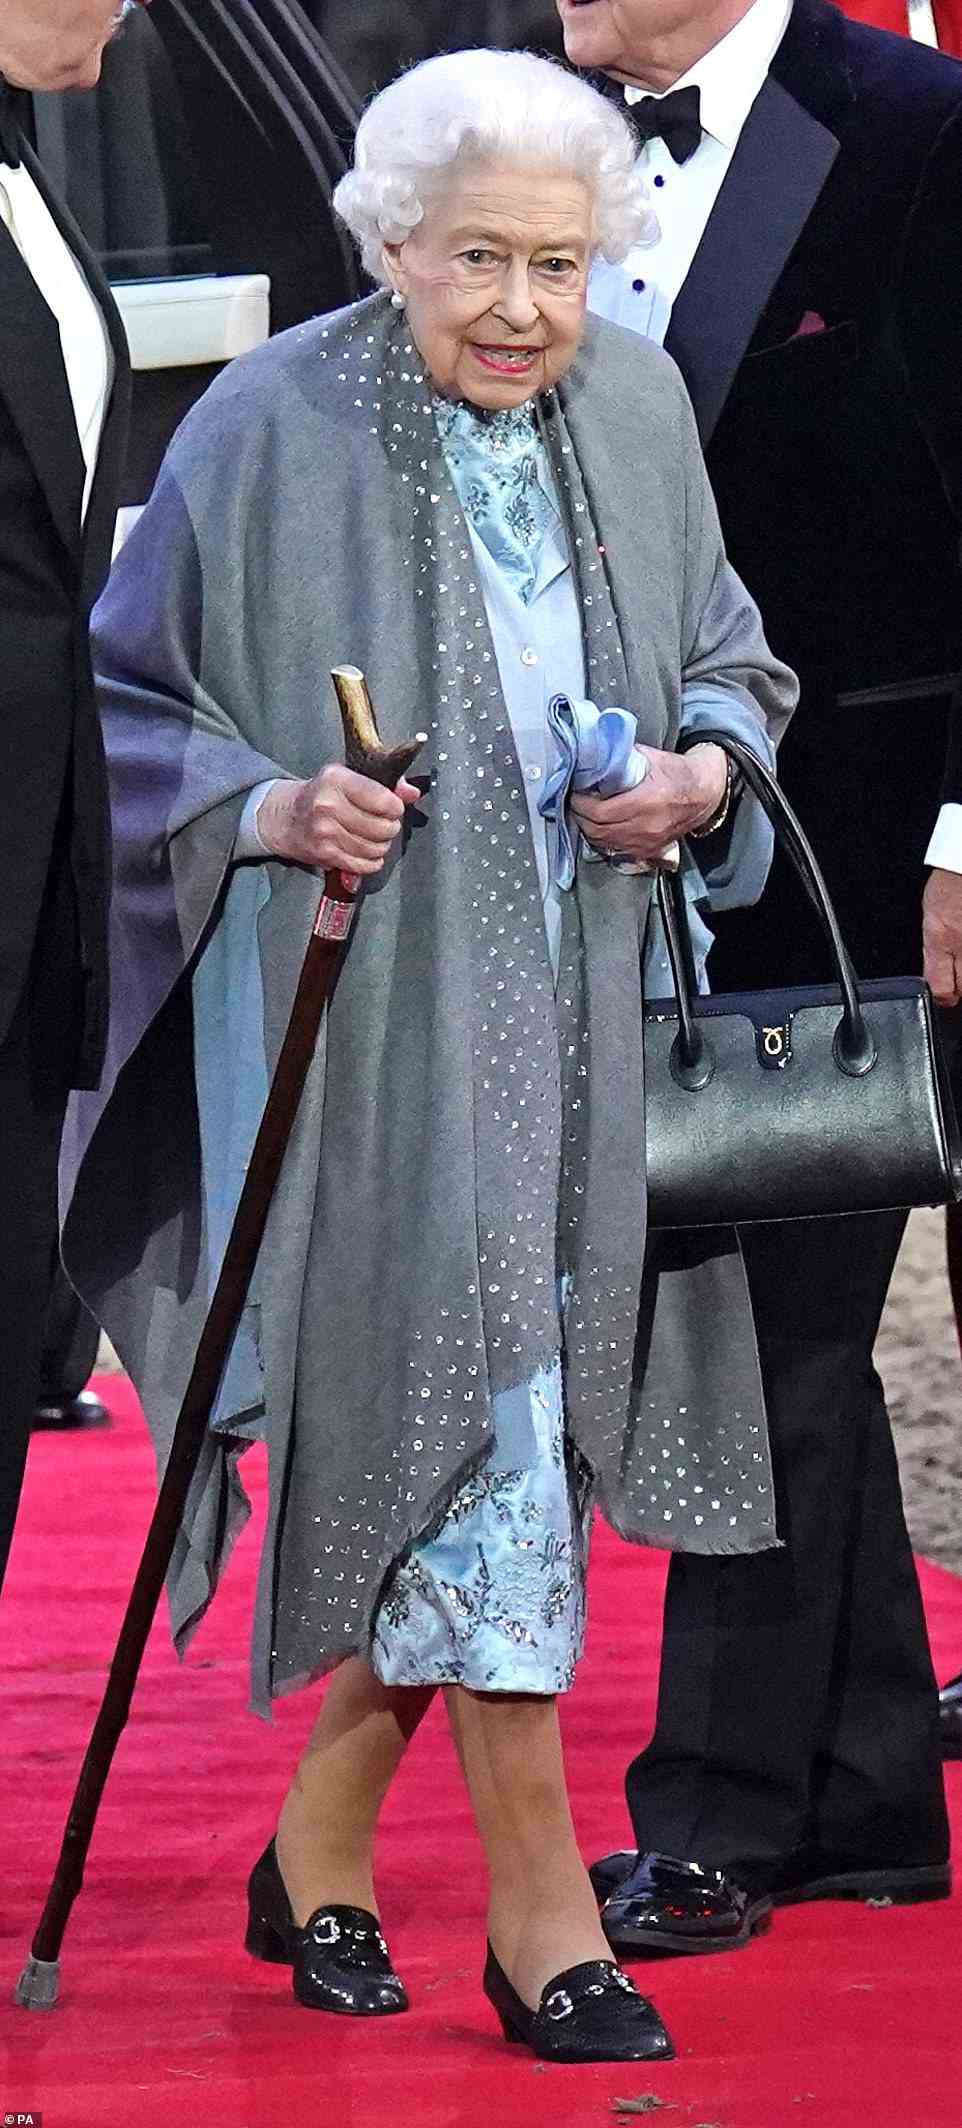 The nation saluted and cheered the 96-year-old monarch exited her Range Rover wearing a glitzy grey cardigan and embellished blue dress, accessorised with black loafers and a handbag.